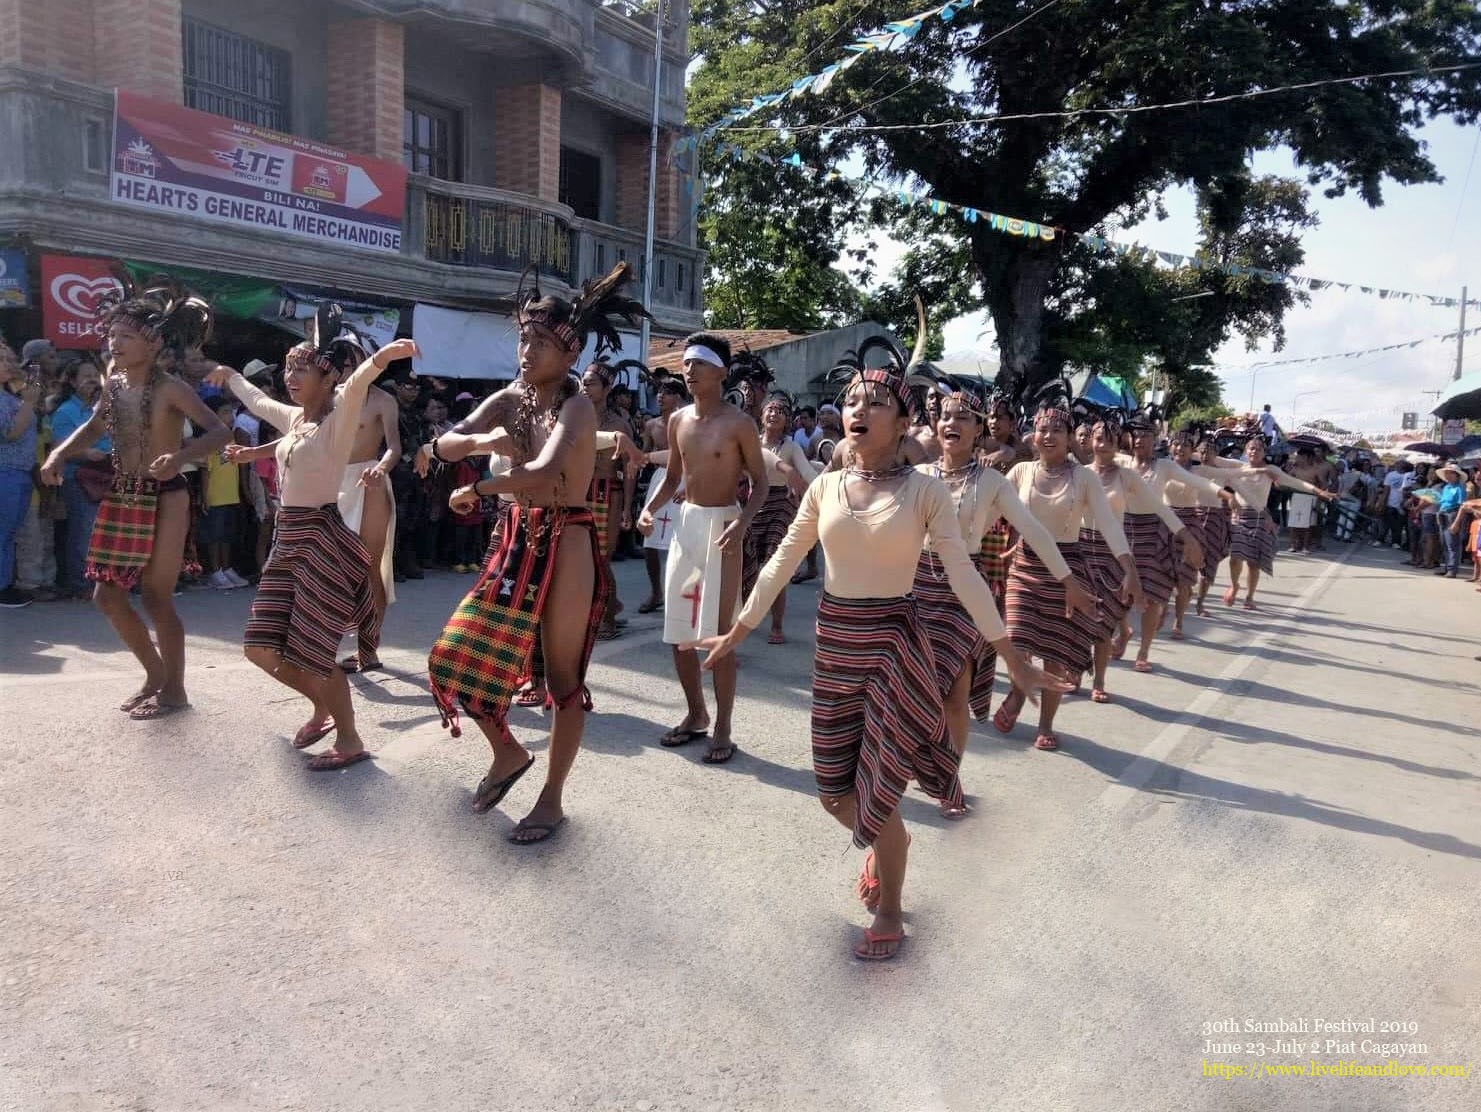 <ul><li><p>Region 2 (Cagayan)</p></li><li><p>A war dance meant to depict the fight between Christians and Non-Christians who opposed Spanish influence performed during the Sambali Festival</p></li></ul>